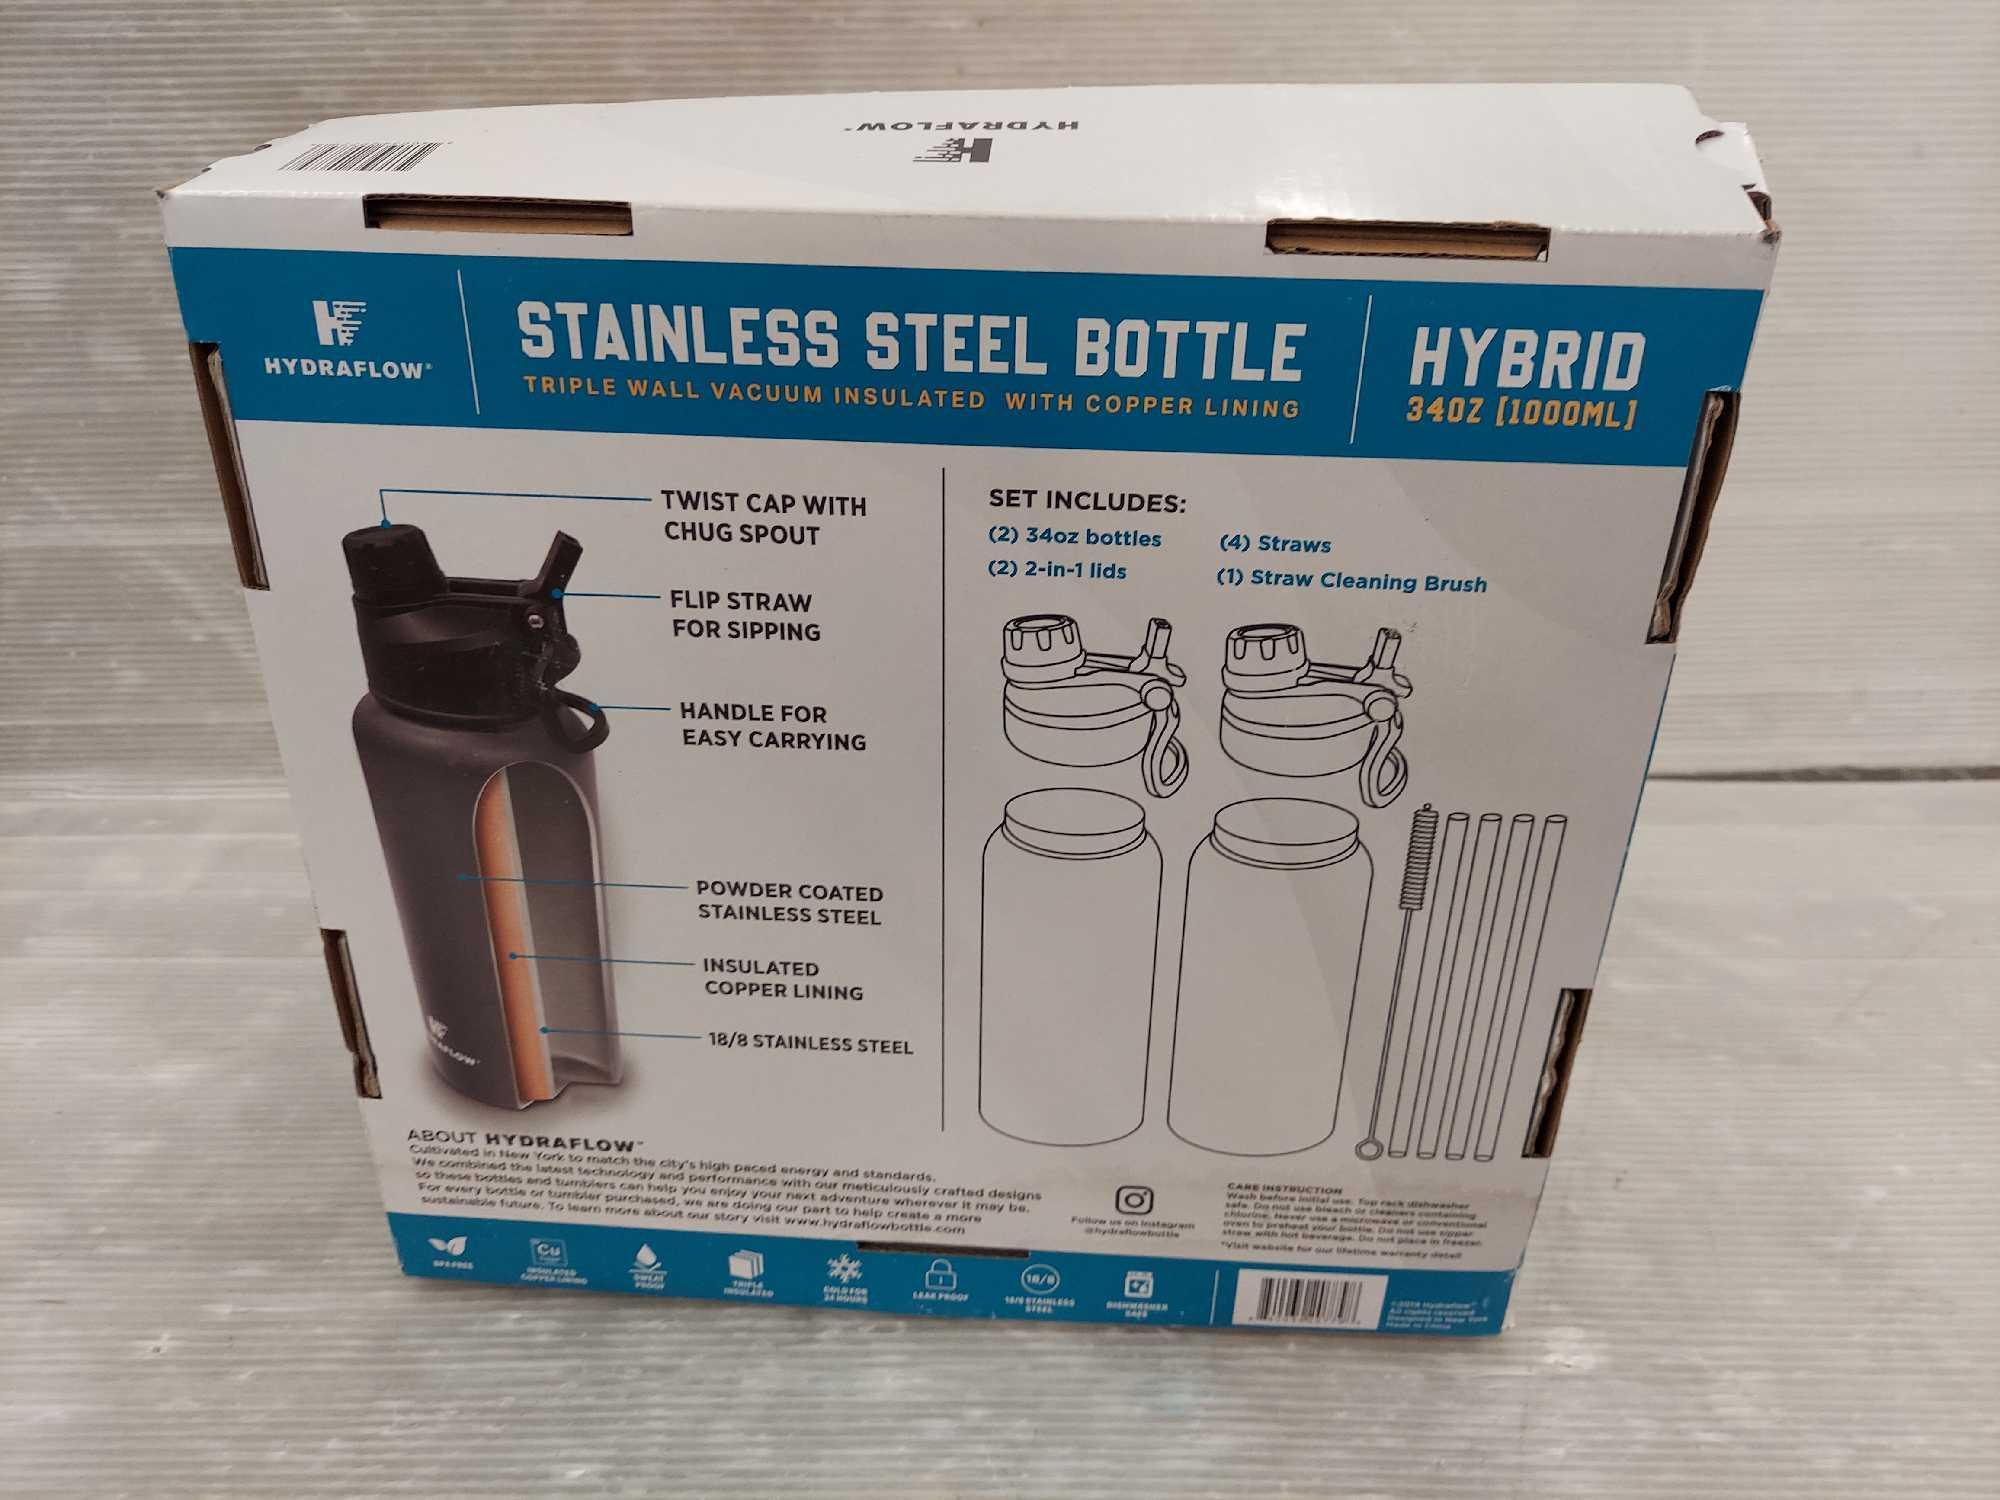 Hydraflow Hybrid Triple Wall Vacuum Insulated with Copper Lining Drinking Bottle